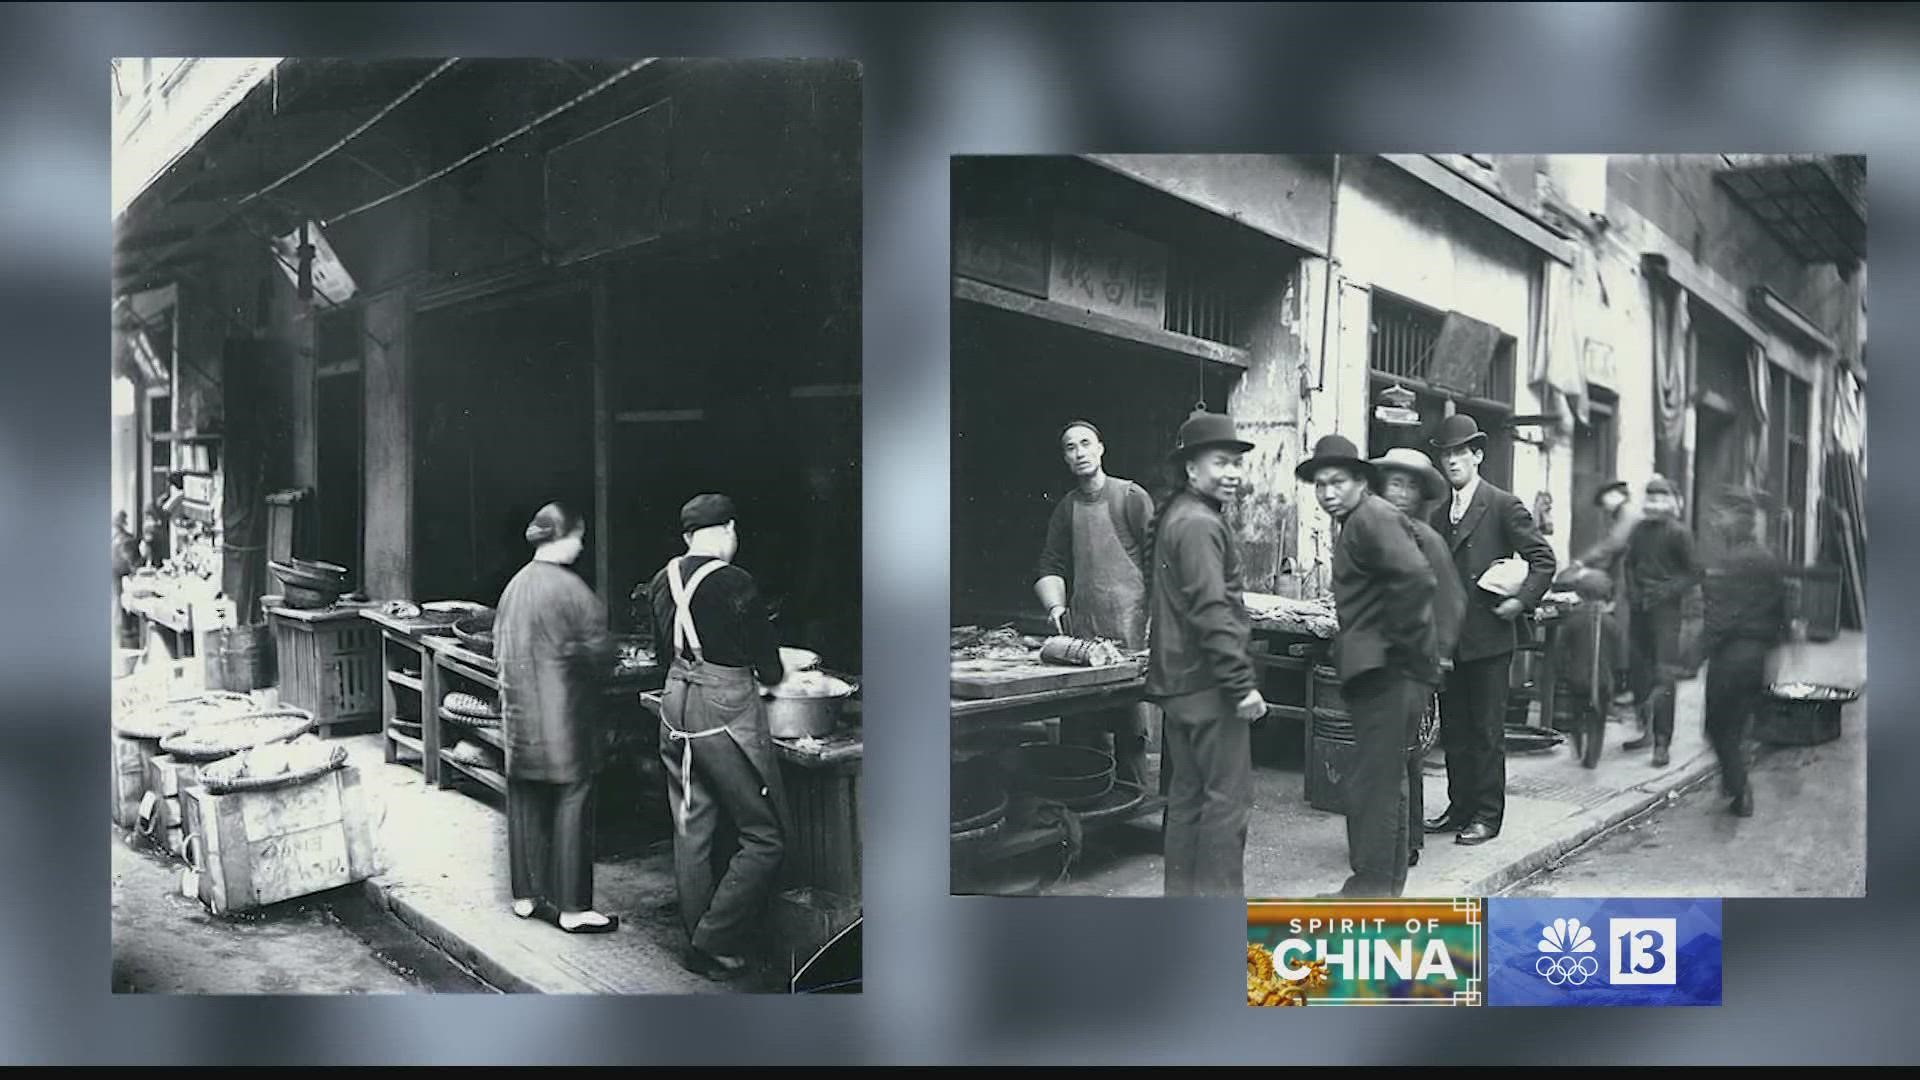 13News visited Chinatowns across the country, and we learned the challenges many faced coming to America.